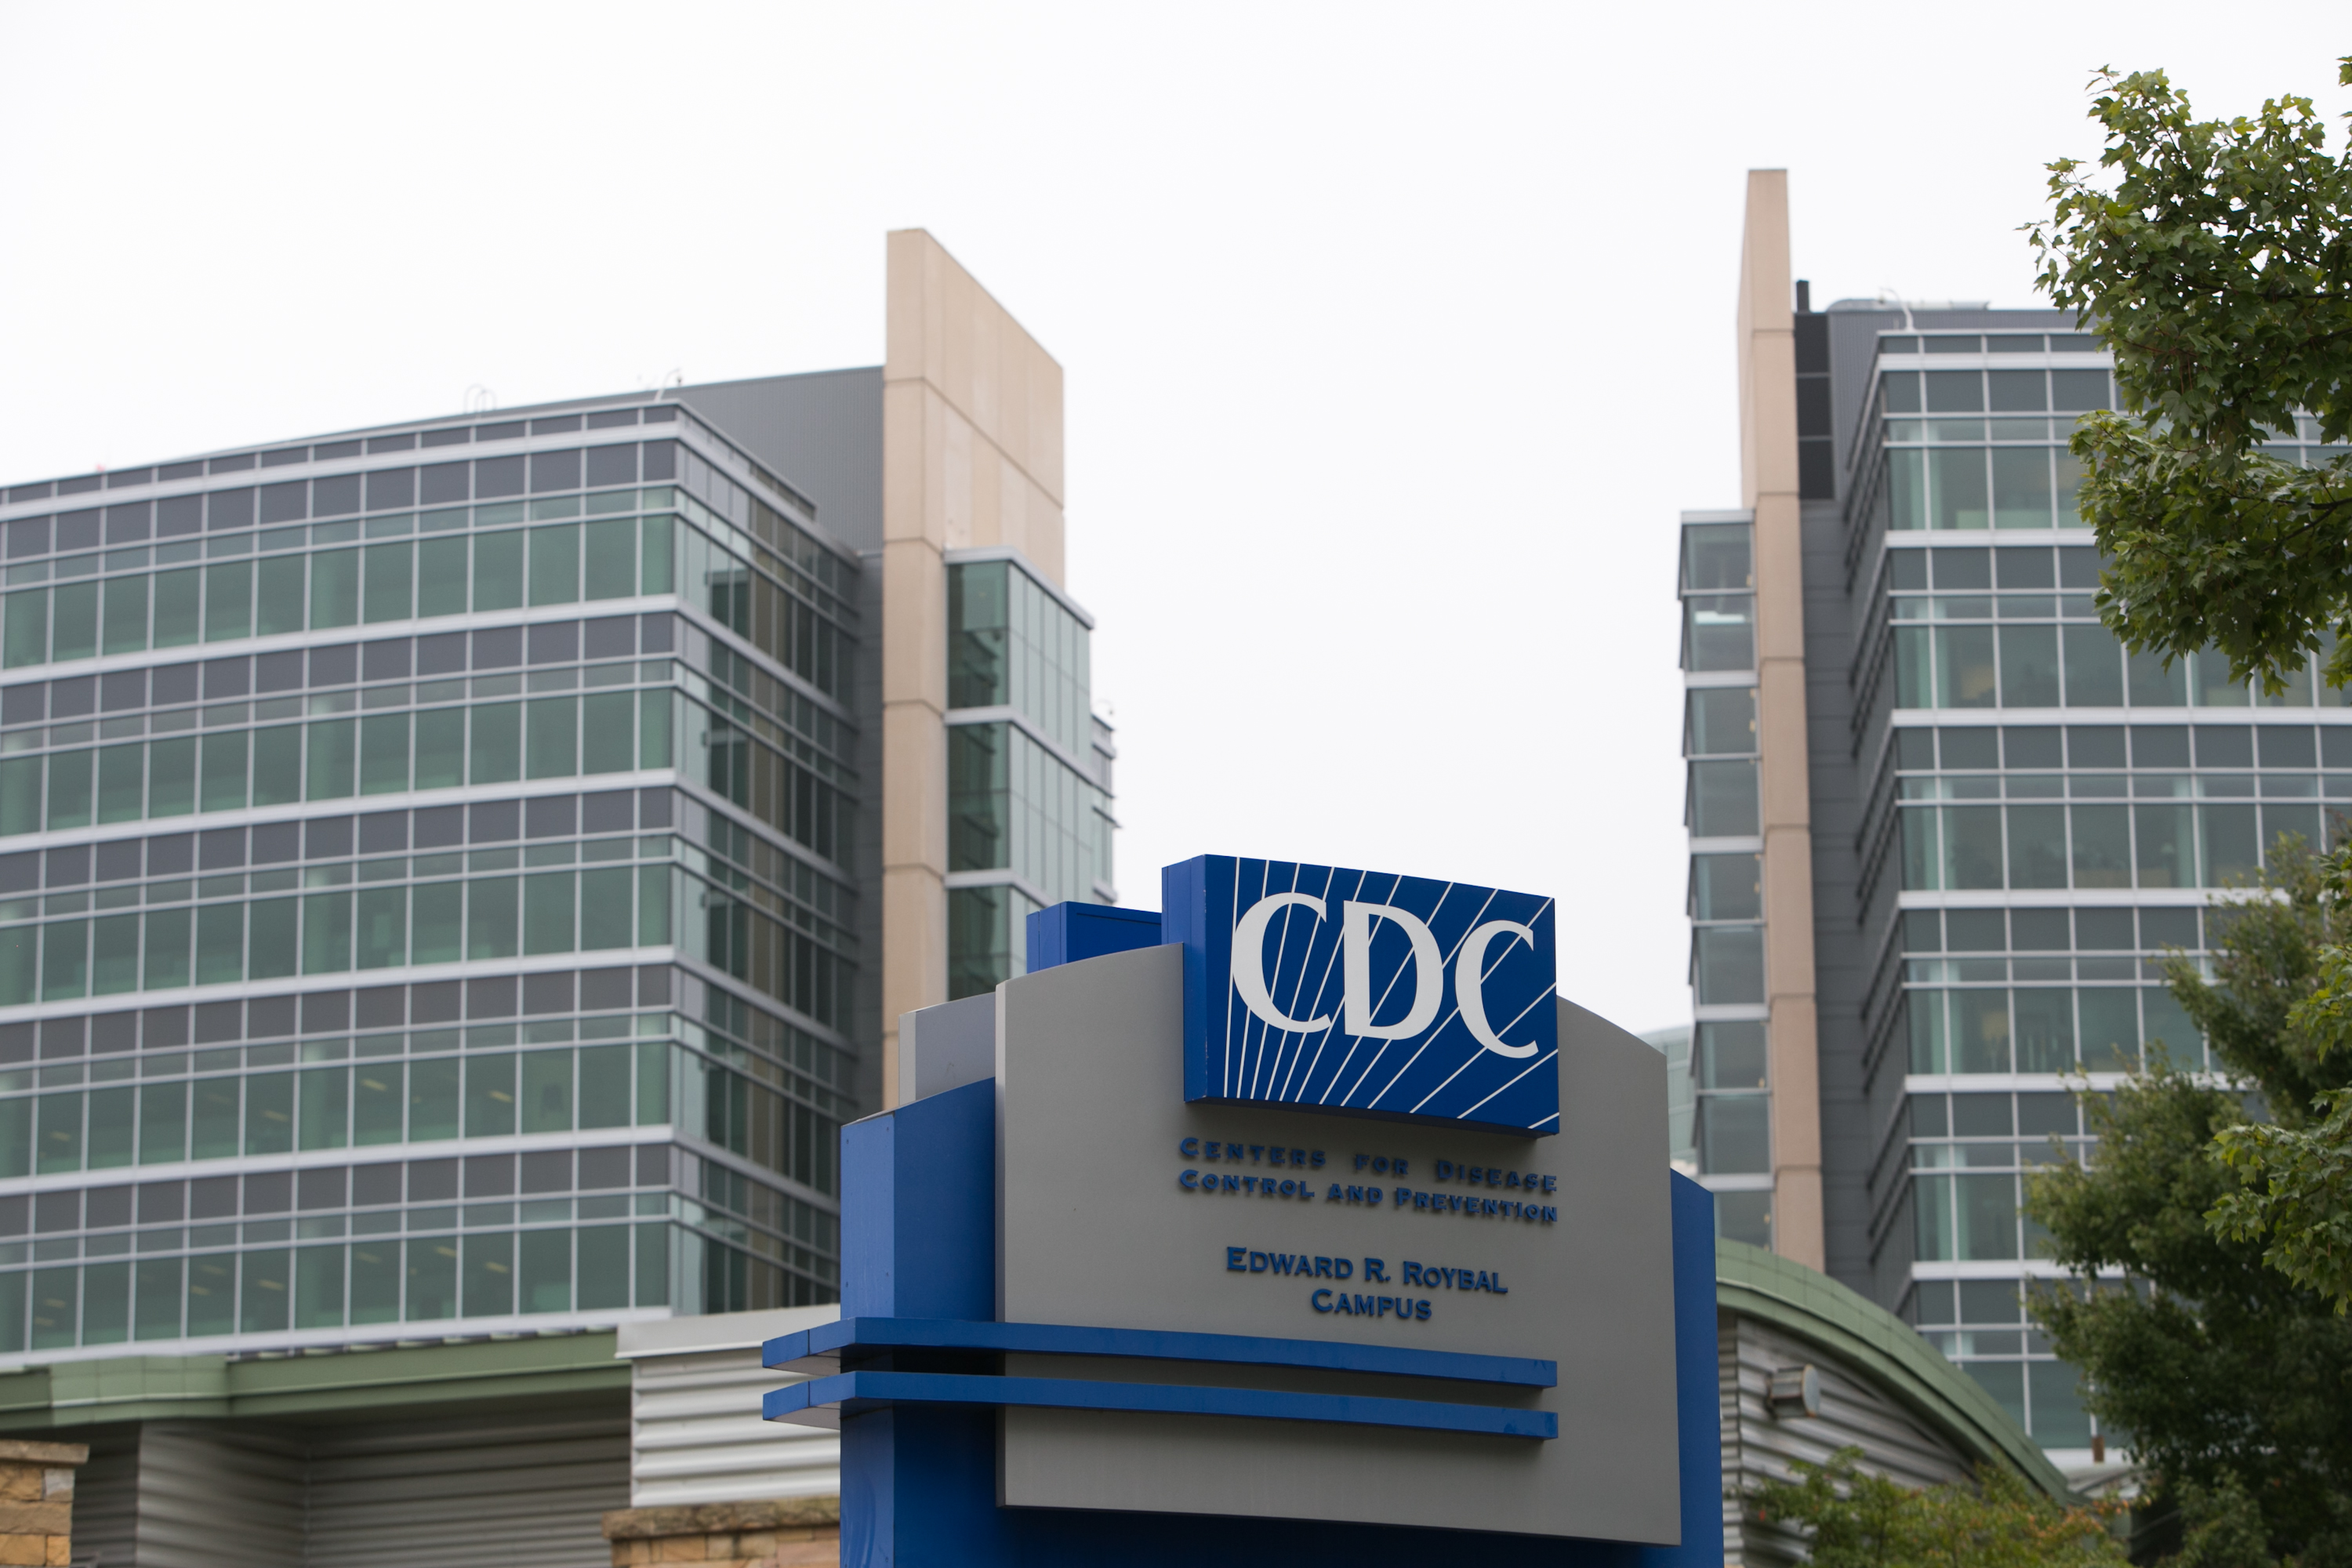 Exterior of CDC headquarters is seen on October 13, 2014 in Atlanta, Georgia. (Jessica McGowan&mdash;Getty Images)